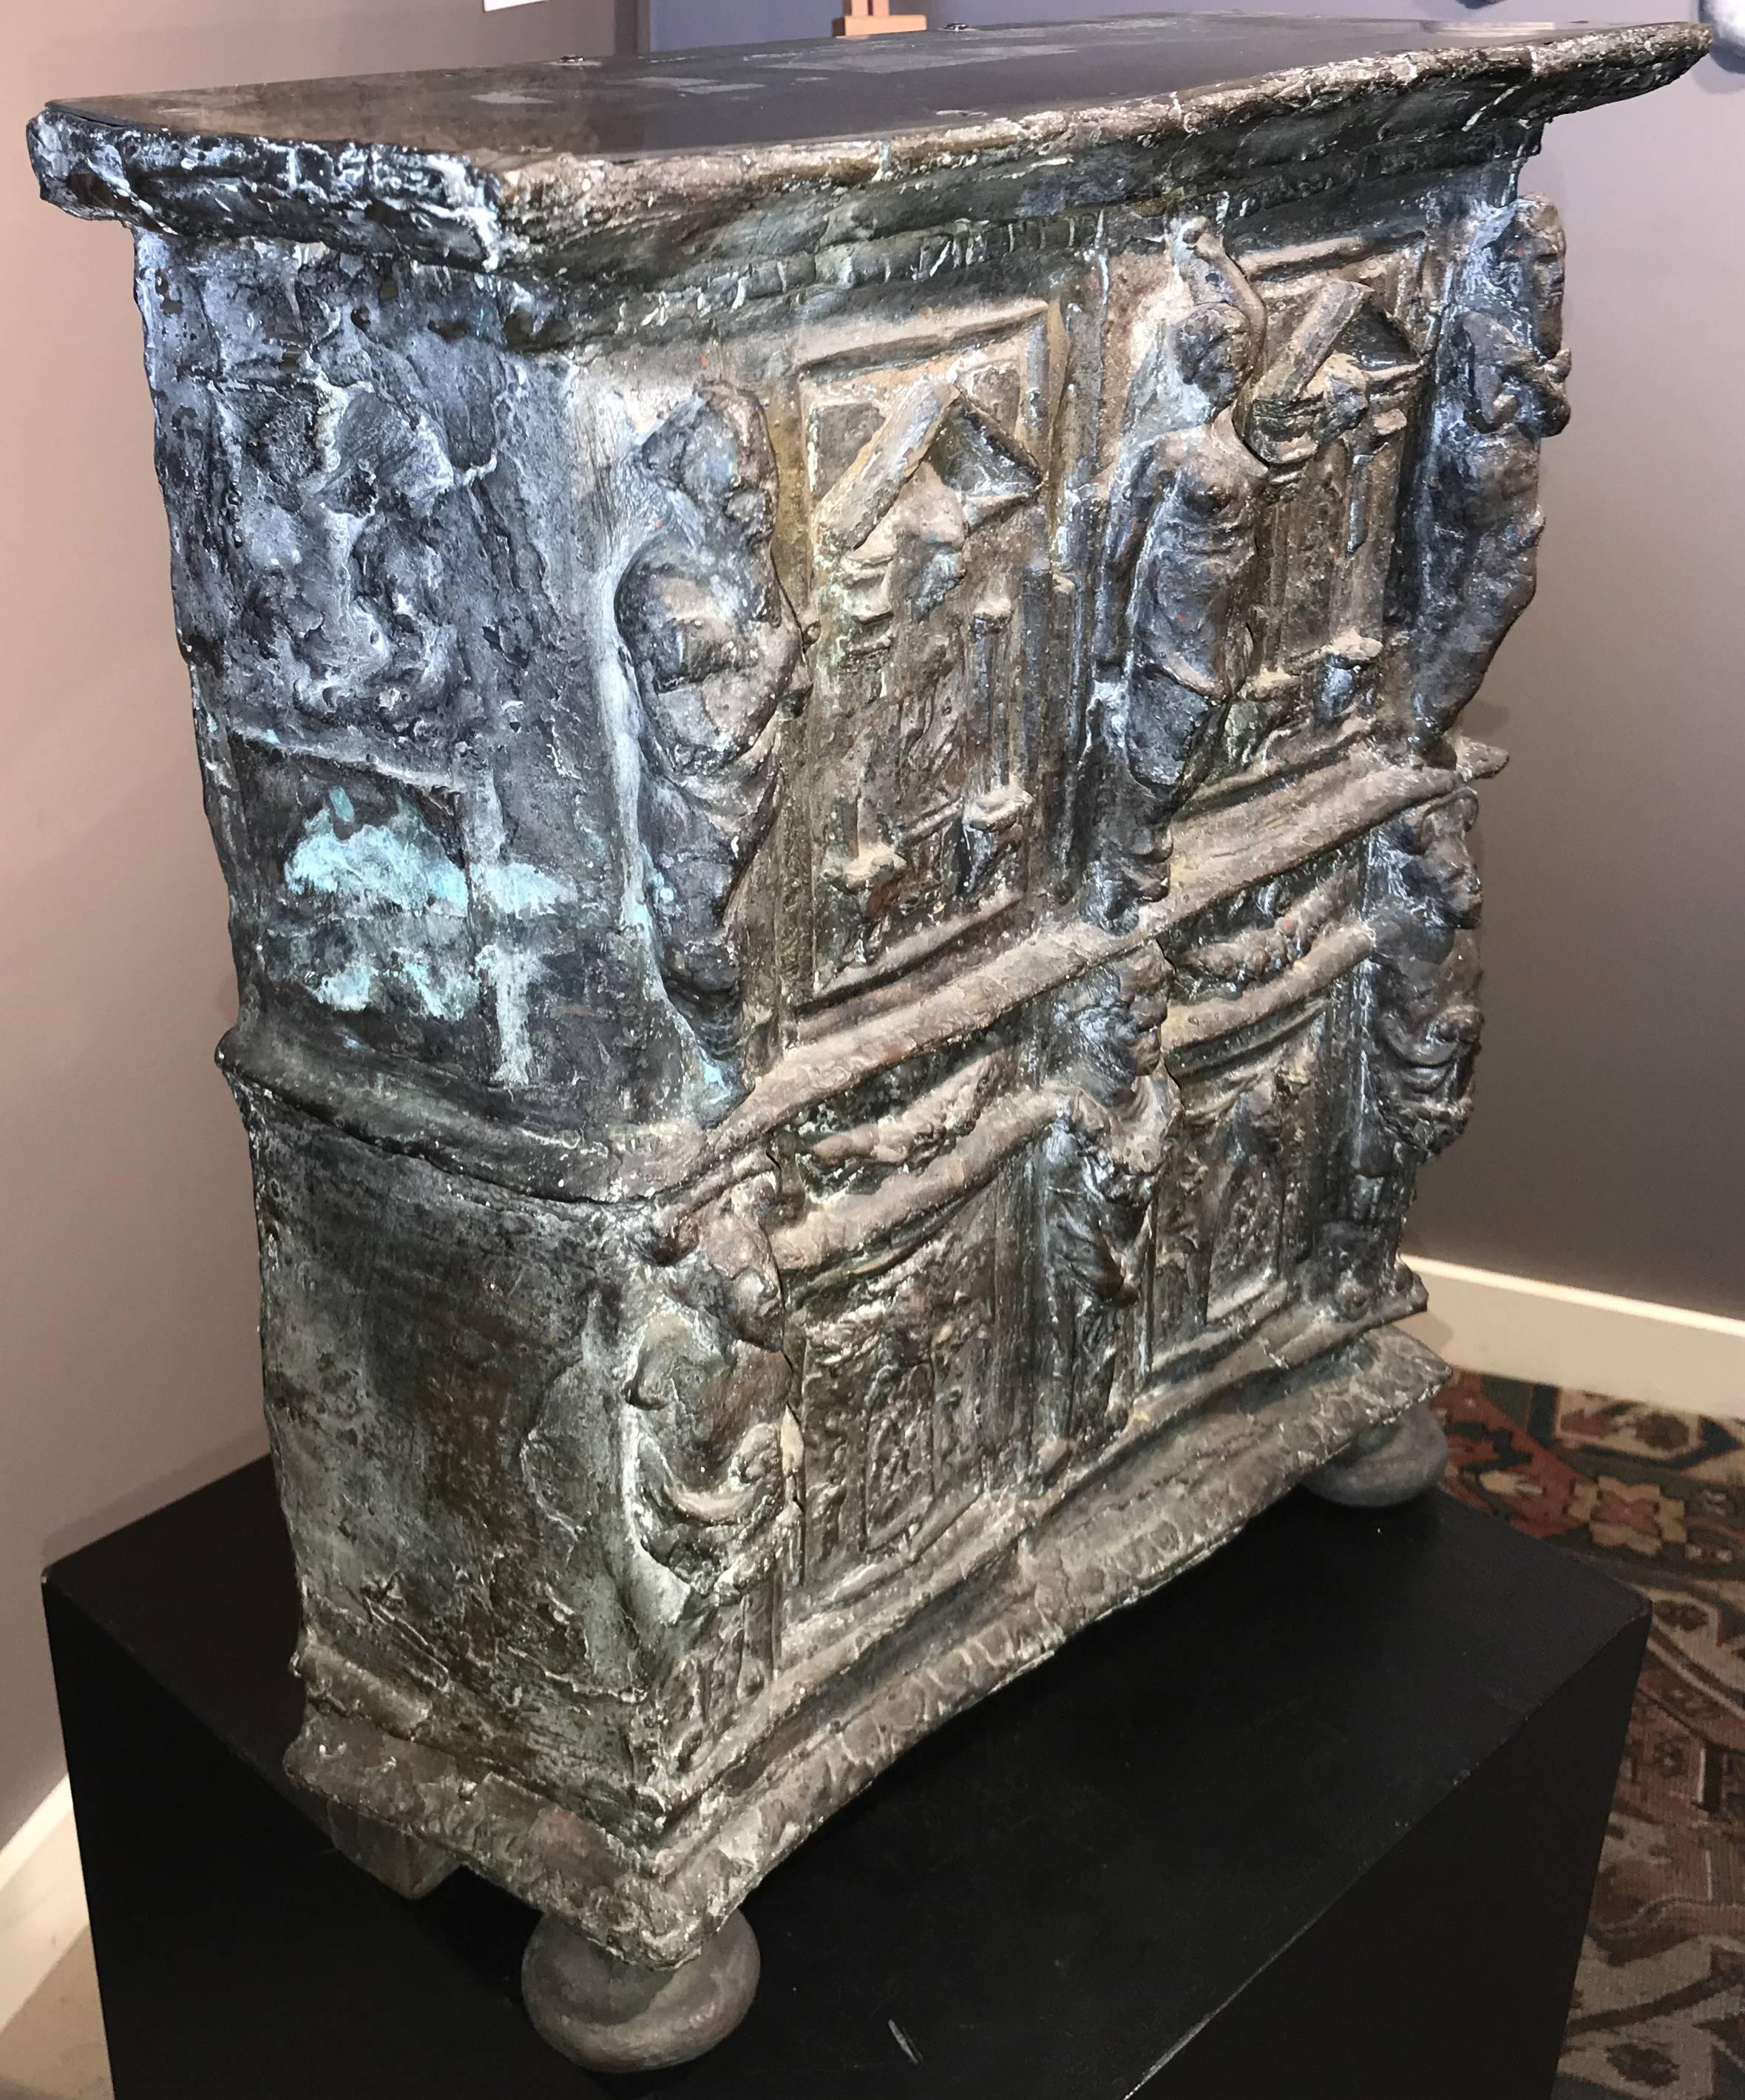 A wonderful abstract bronze sculpture titled “Bronze Armoire” by American sculptor and artist Neal Beckerman (20th / 21st century). Beckerman was born in 1949 in Newton, Massachusetts. He attended the School of the Museum of Fine Arts, Boston,